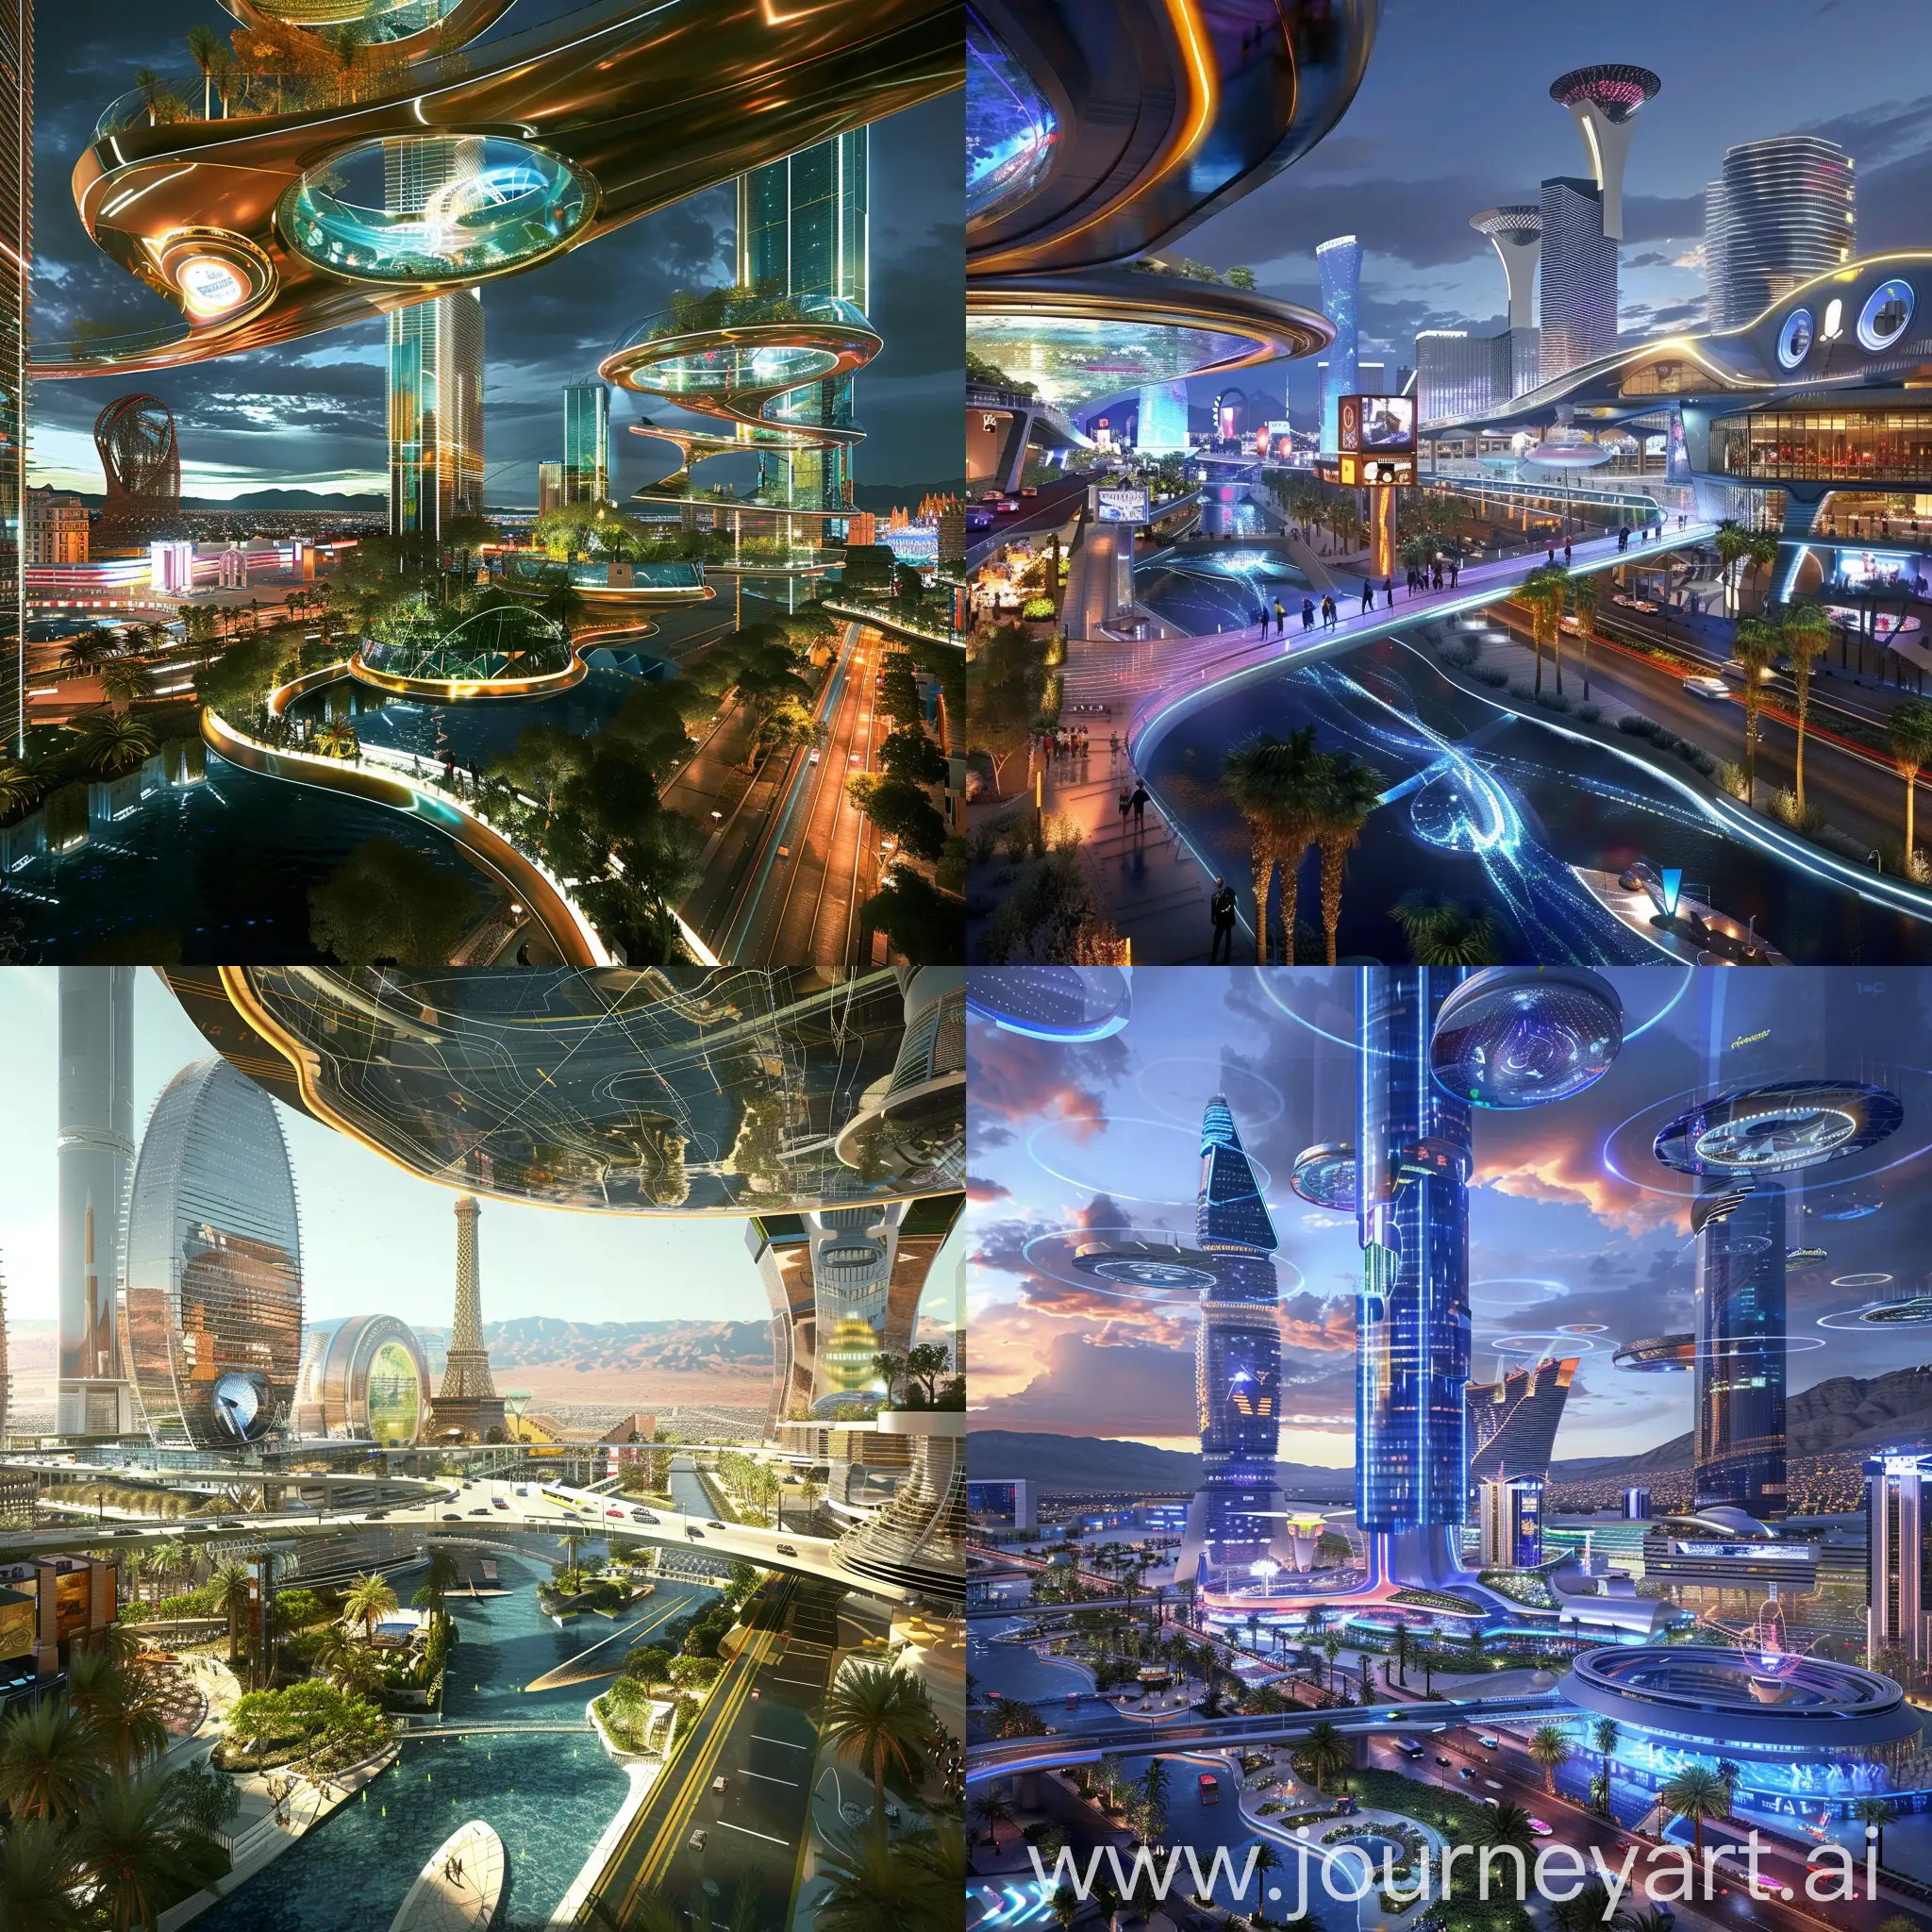 Futuristic Las Vegas, Smart Energy Grids, Interactive Entertainment Venues, Advanced Water Reclamation Facilities, AI-Managed Infrastructure, Vertical Gardens, Robotic Workforce, 3D-Printed Structures, Augmented Reality Navigation, Hyperloop Connections, Dynamic Skyscrapers, Drone Traffic Management Systems, Solar-Powered Illumination, Interactive Public Art, Atmospheric Water Generators, Urban Air Mobility Platforms, Eco-Friendly Resorts, Smart Windows, Outdoor Holographic Displays, Kinetic Pavements, in technological style, in progressive style, in dynamic style, in speed style, in unreal engine 5 style --stylize 1000